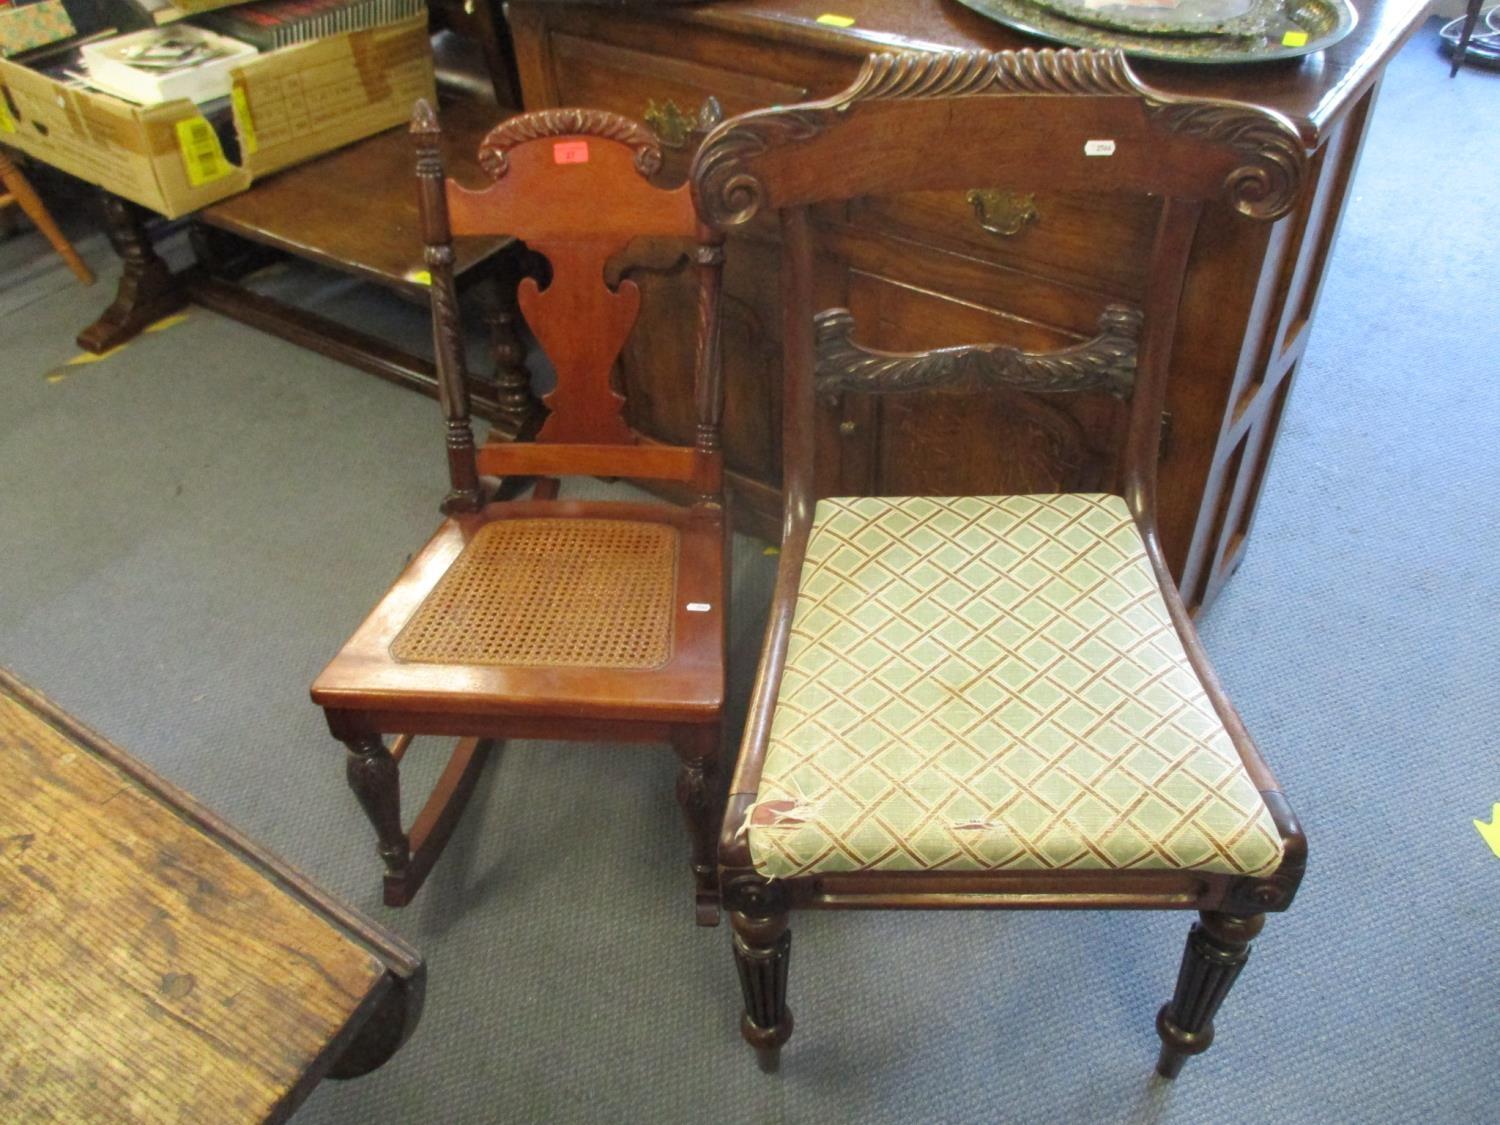 A Victorian mahogany cane seated rocking chair with pineapple finials, and a William IV rosewood bar